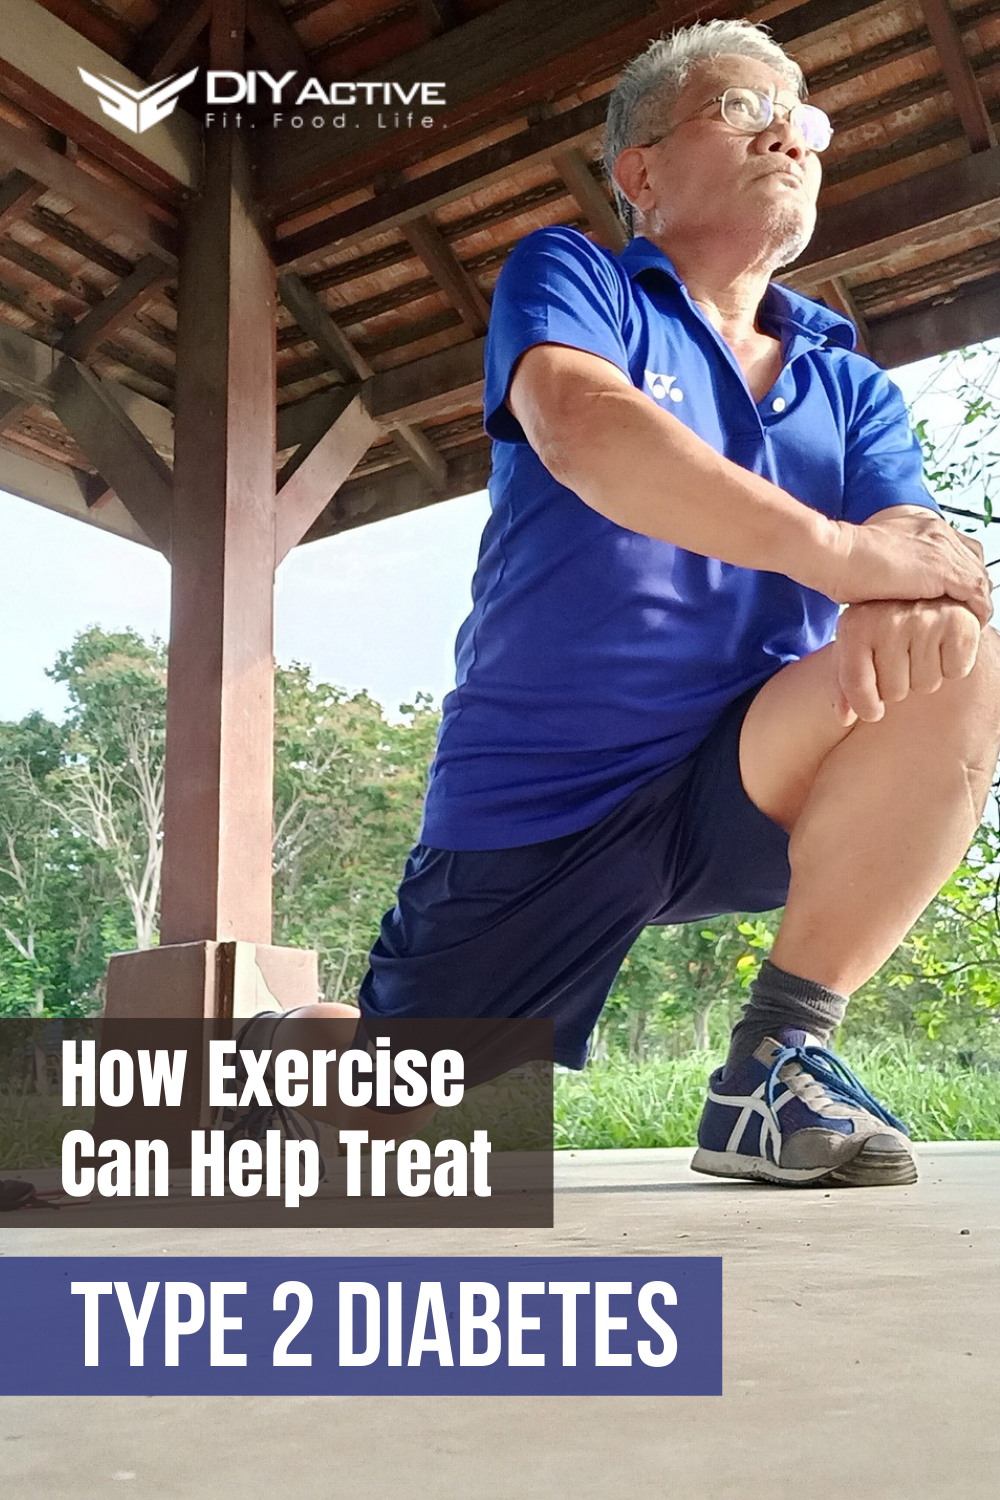 How Exercise Can Help Treat Type 2 Diabetes